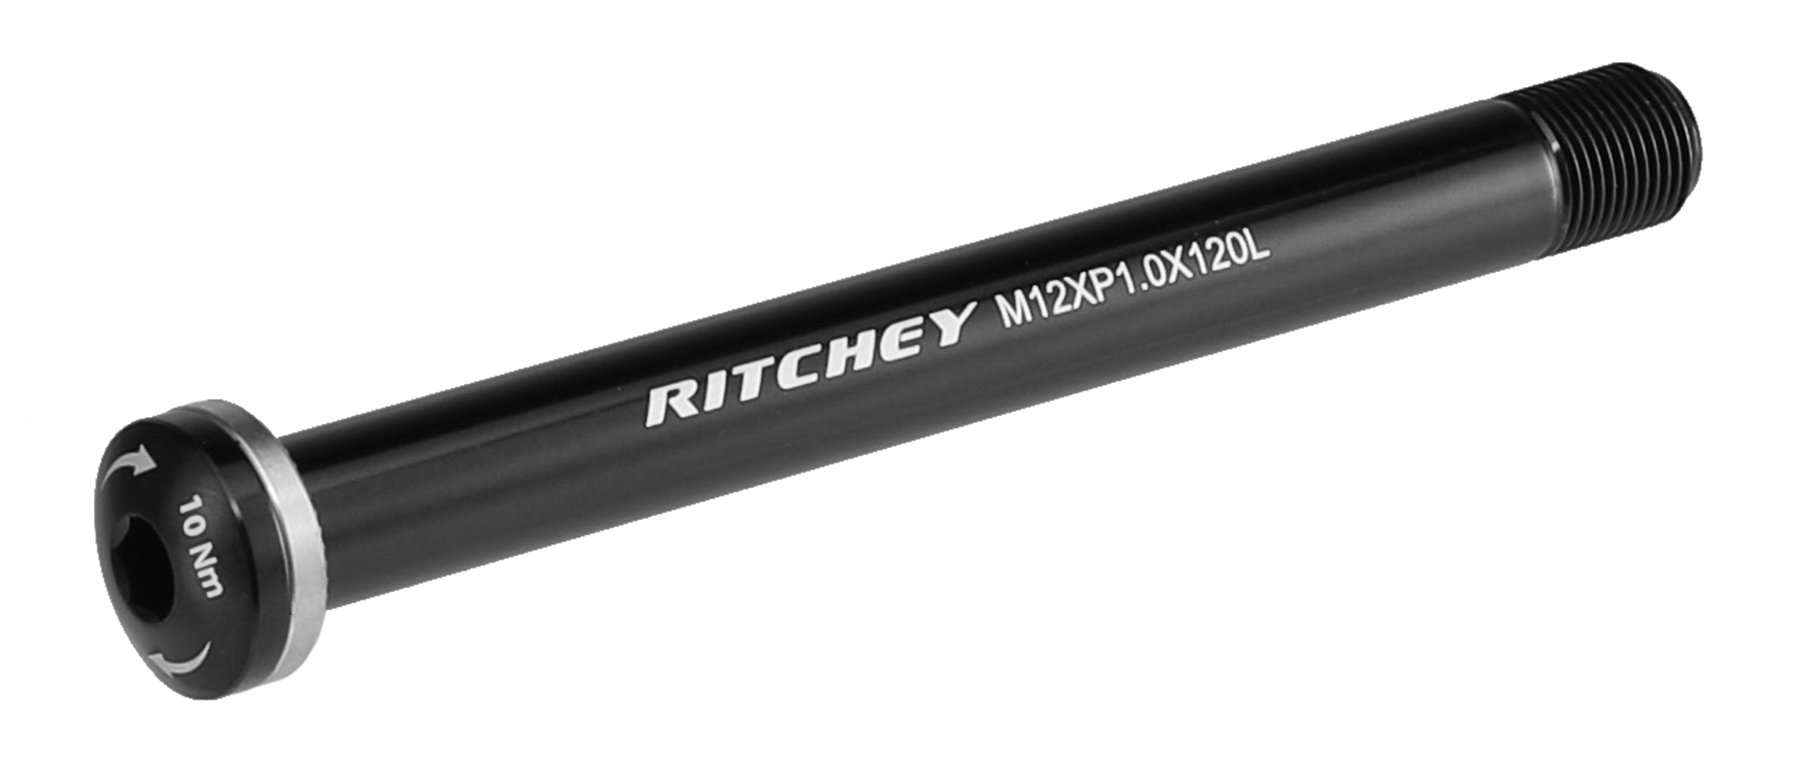 Ritchey WCS Carbon Tapered All Road Cross Fork